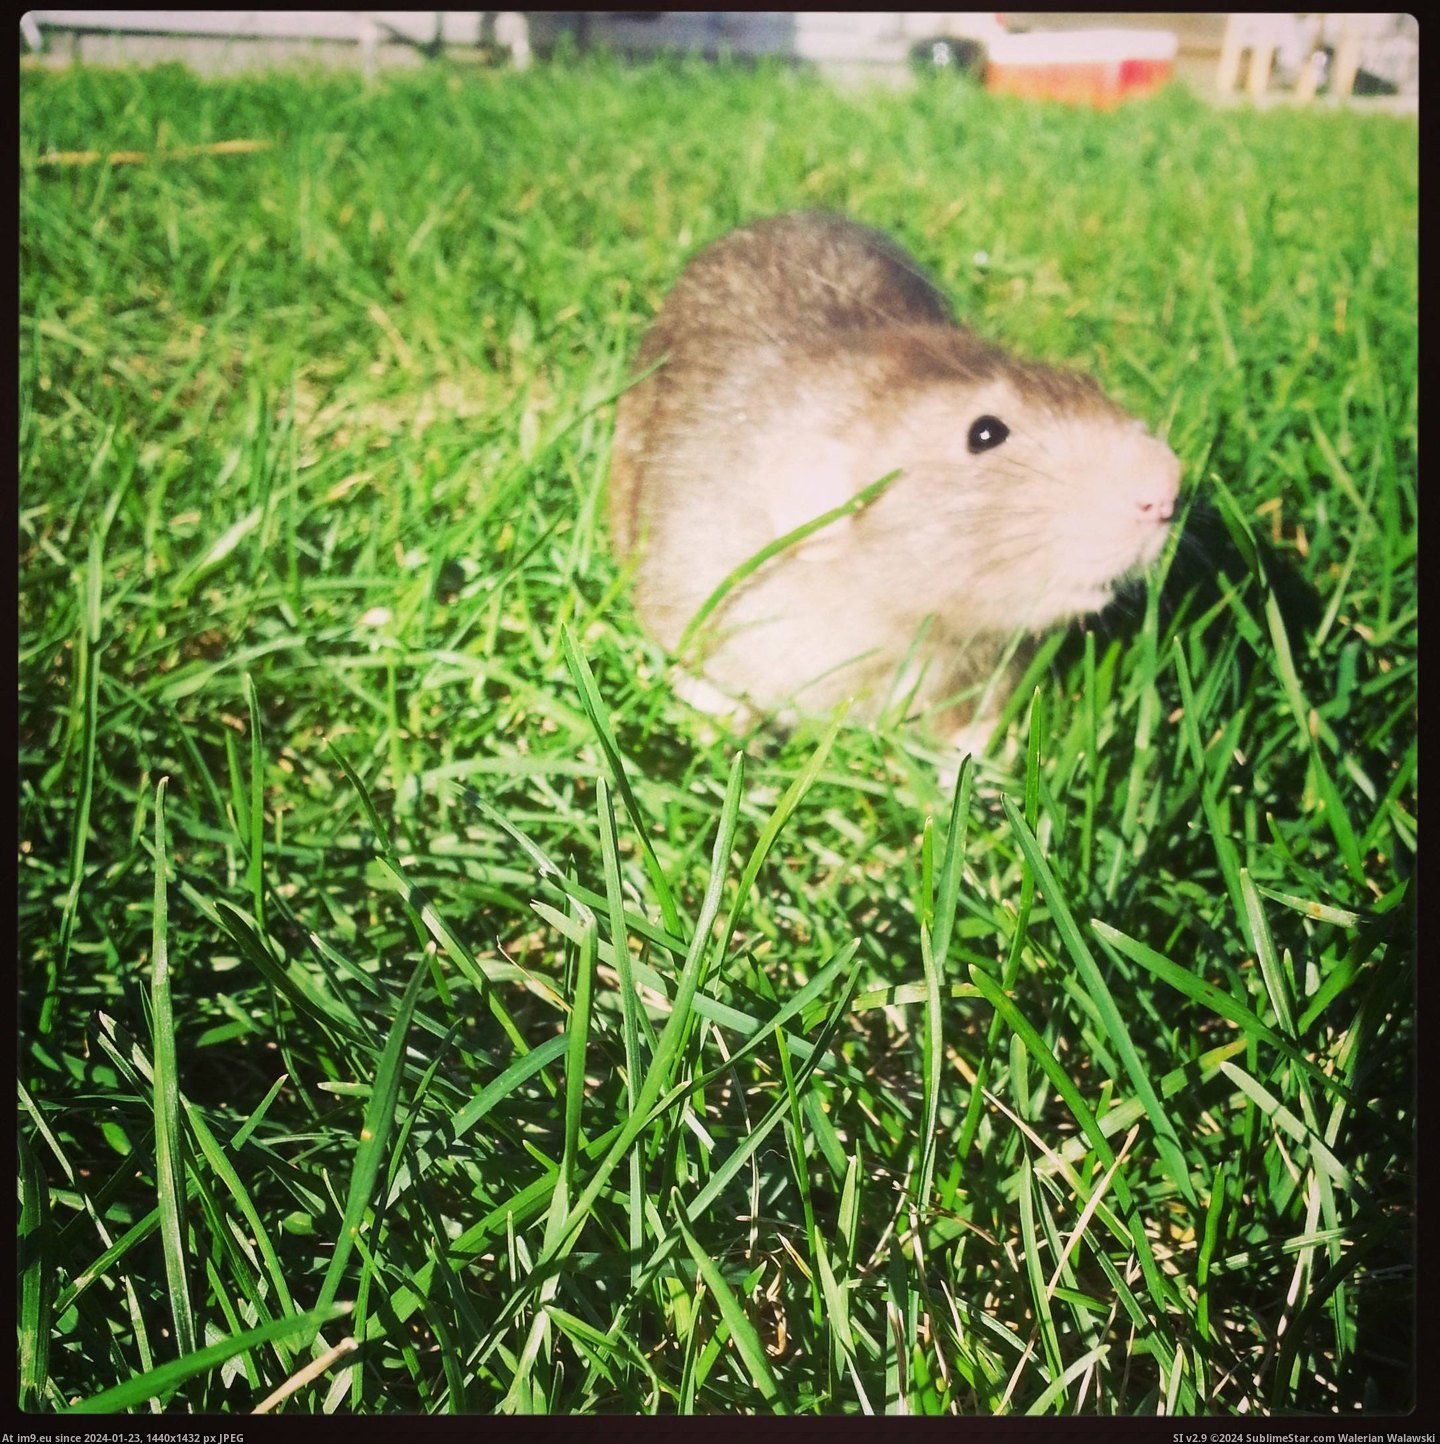 #Not #But #Grass #Traditional #Ratatouille #Loves #Buddy [Aww] Not traditional aww, but my buddy Ratatouille loves the grass. Pic. (Изображение из альбом My r/AWW favs))